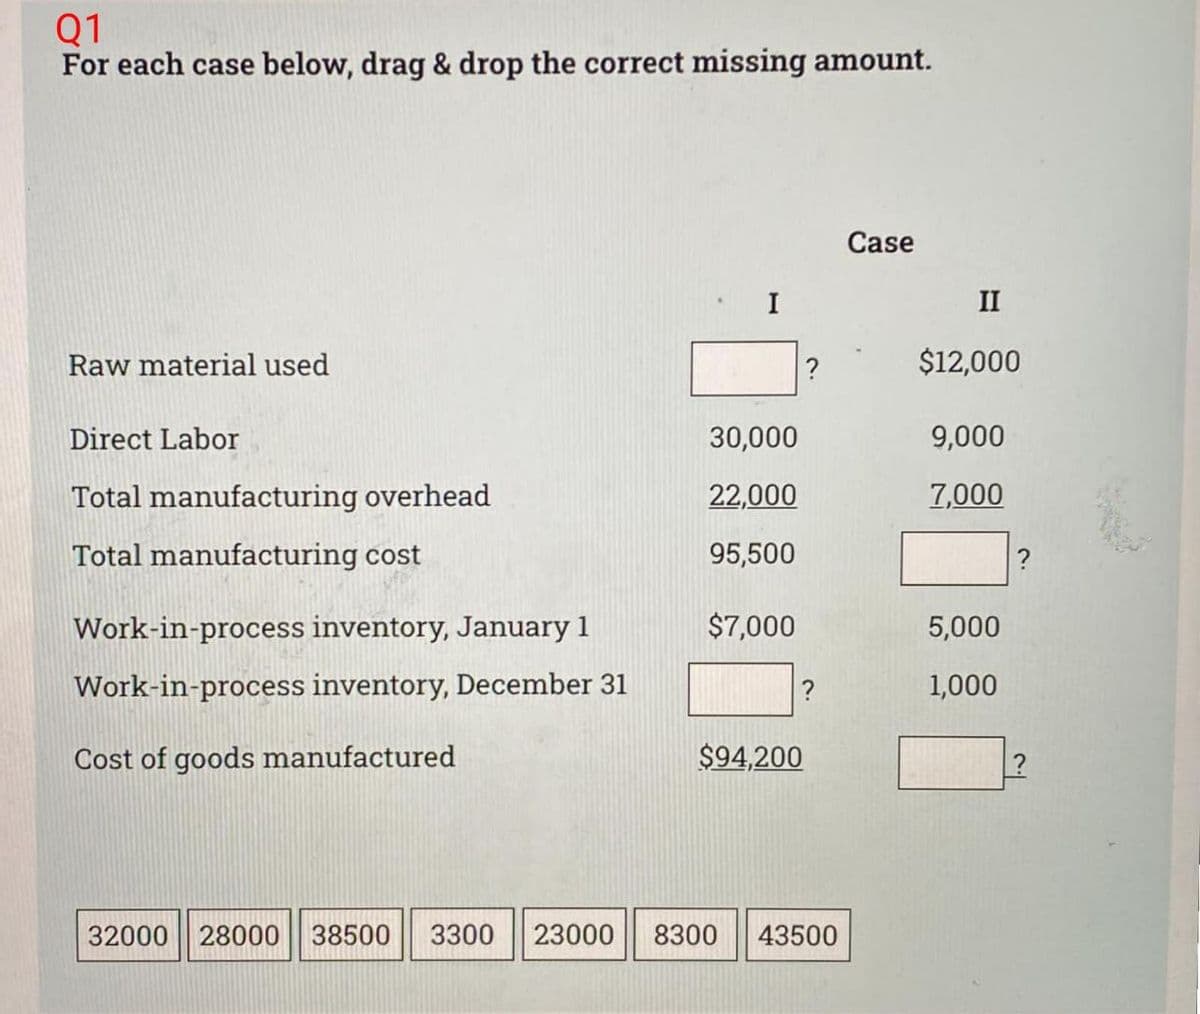 Q1
For each case below, drag & drop the correct missing amount.
Raw material used
Direct Labor
Total manufacturing overhead
Total manufacturing cost
Work-in-process inventory, January 1
Work-in-process inventory, December 31
Cost of goods manufactured
I
30,000
22,000
95,500
$7,000
?
?
$94,200
32000 28000 38500 3300 23000 8300 43500
Case
II
$12,000
9,000
7,000
5,000
1,000
?